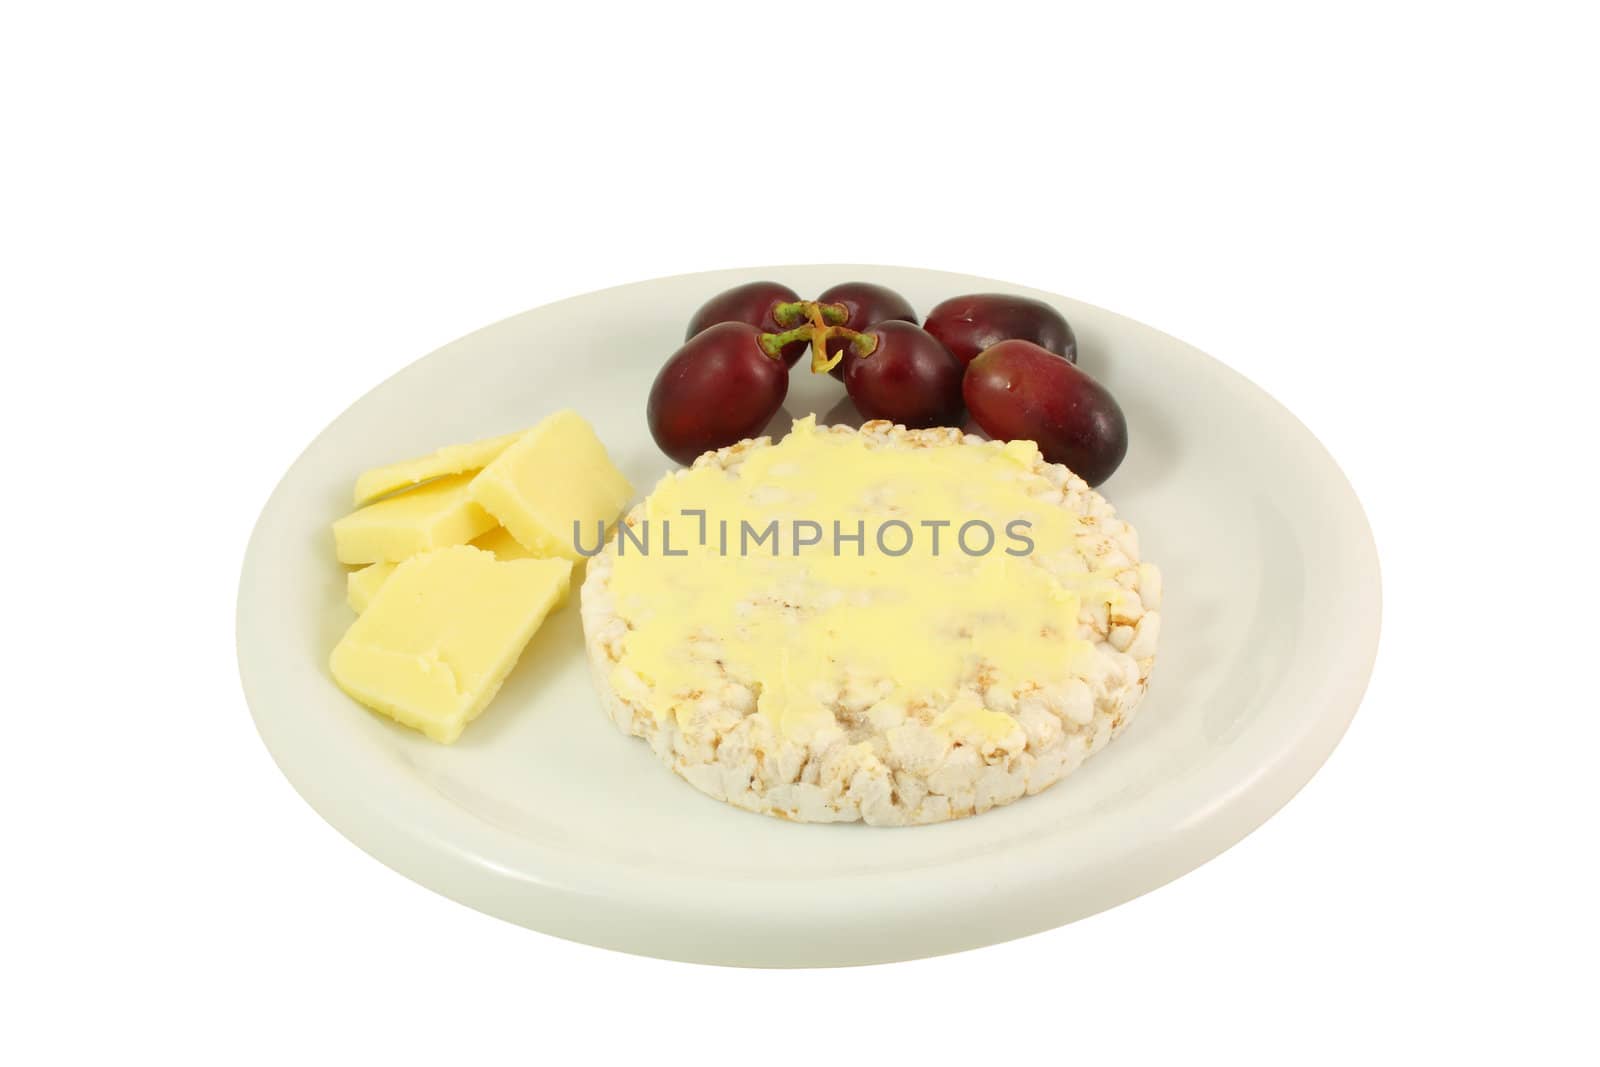 chesse, grapes and a rice cake on a white plate by robbino